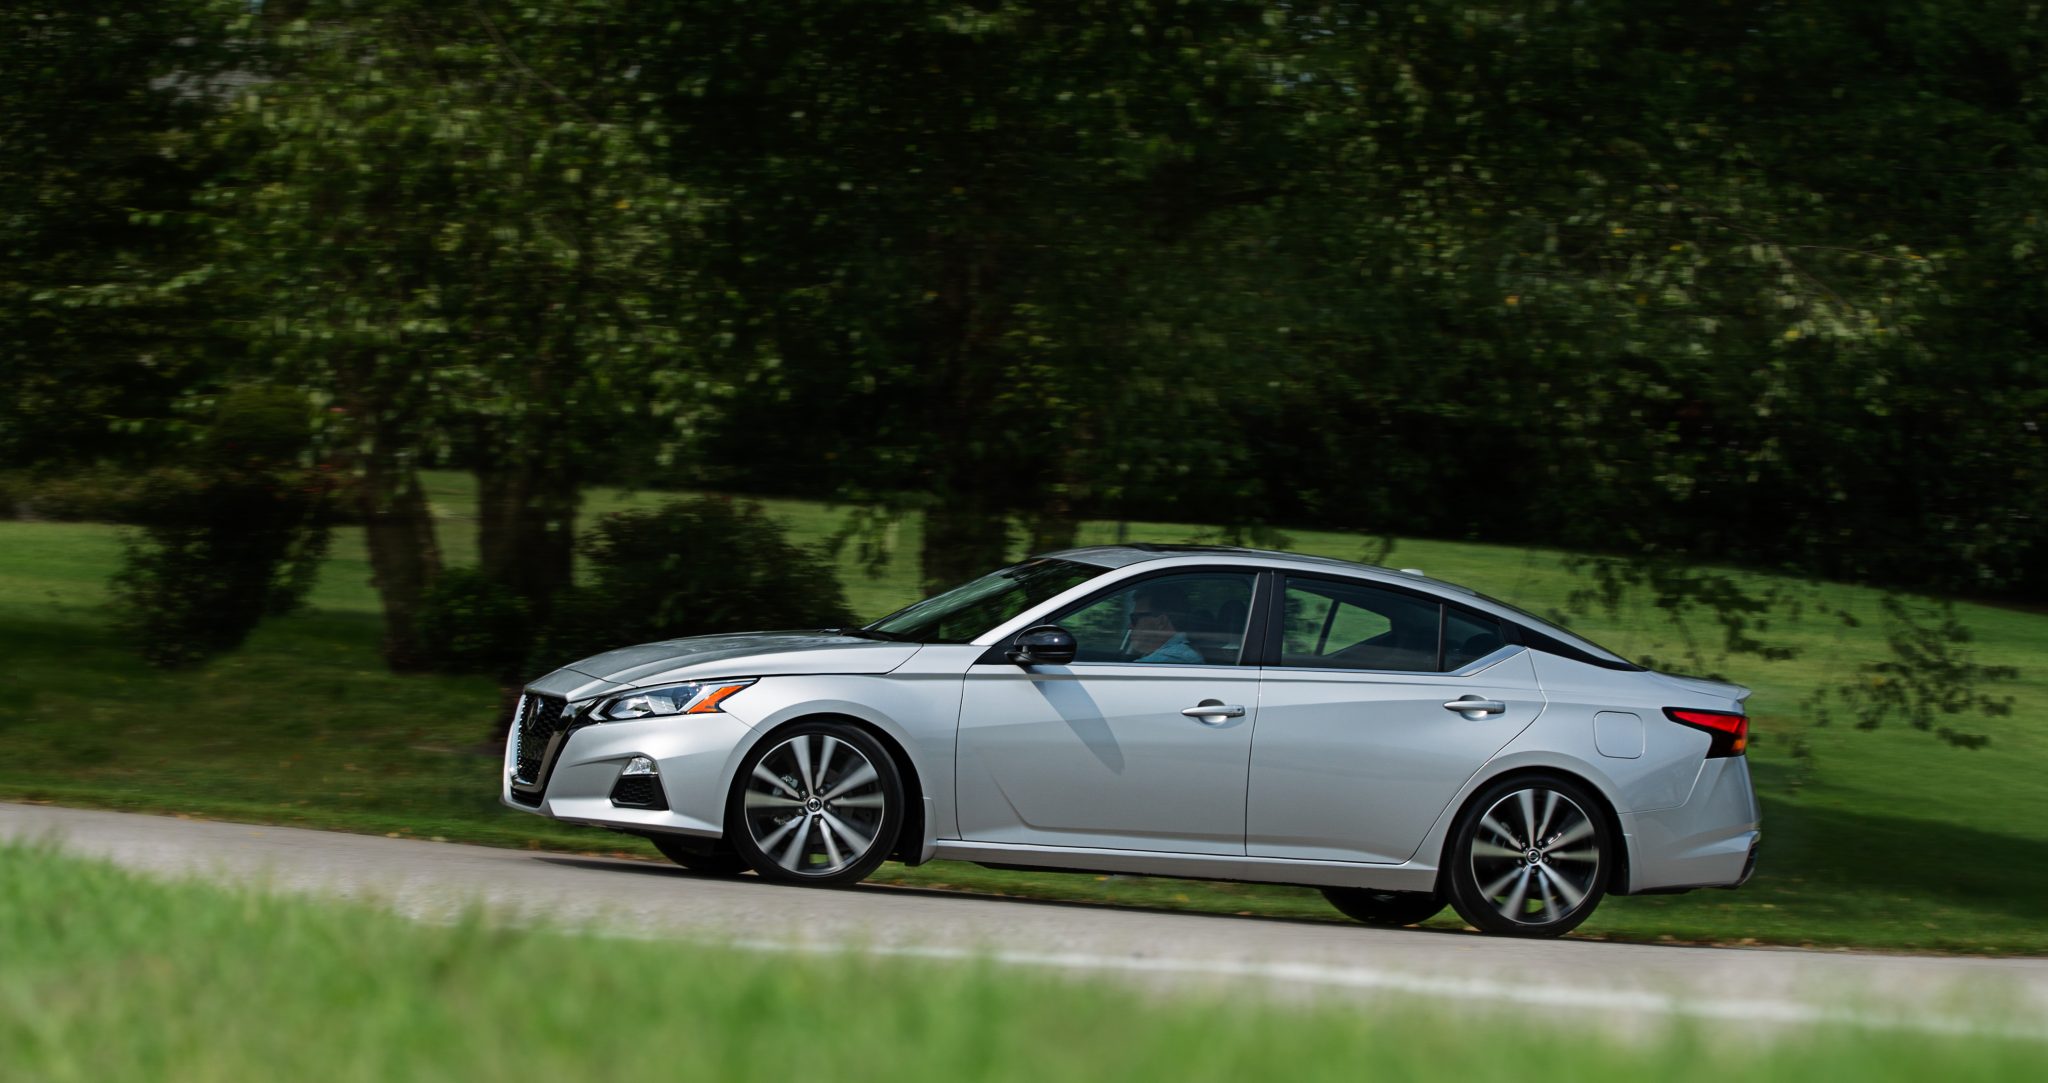 The 2022 Nissan Altima offers consumers style, affordability, and